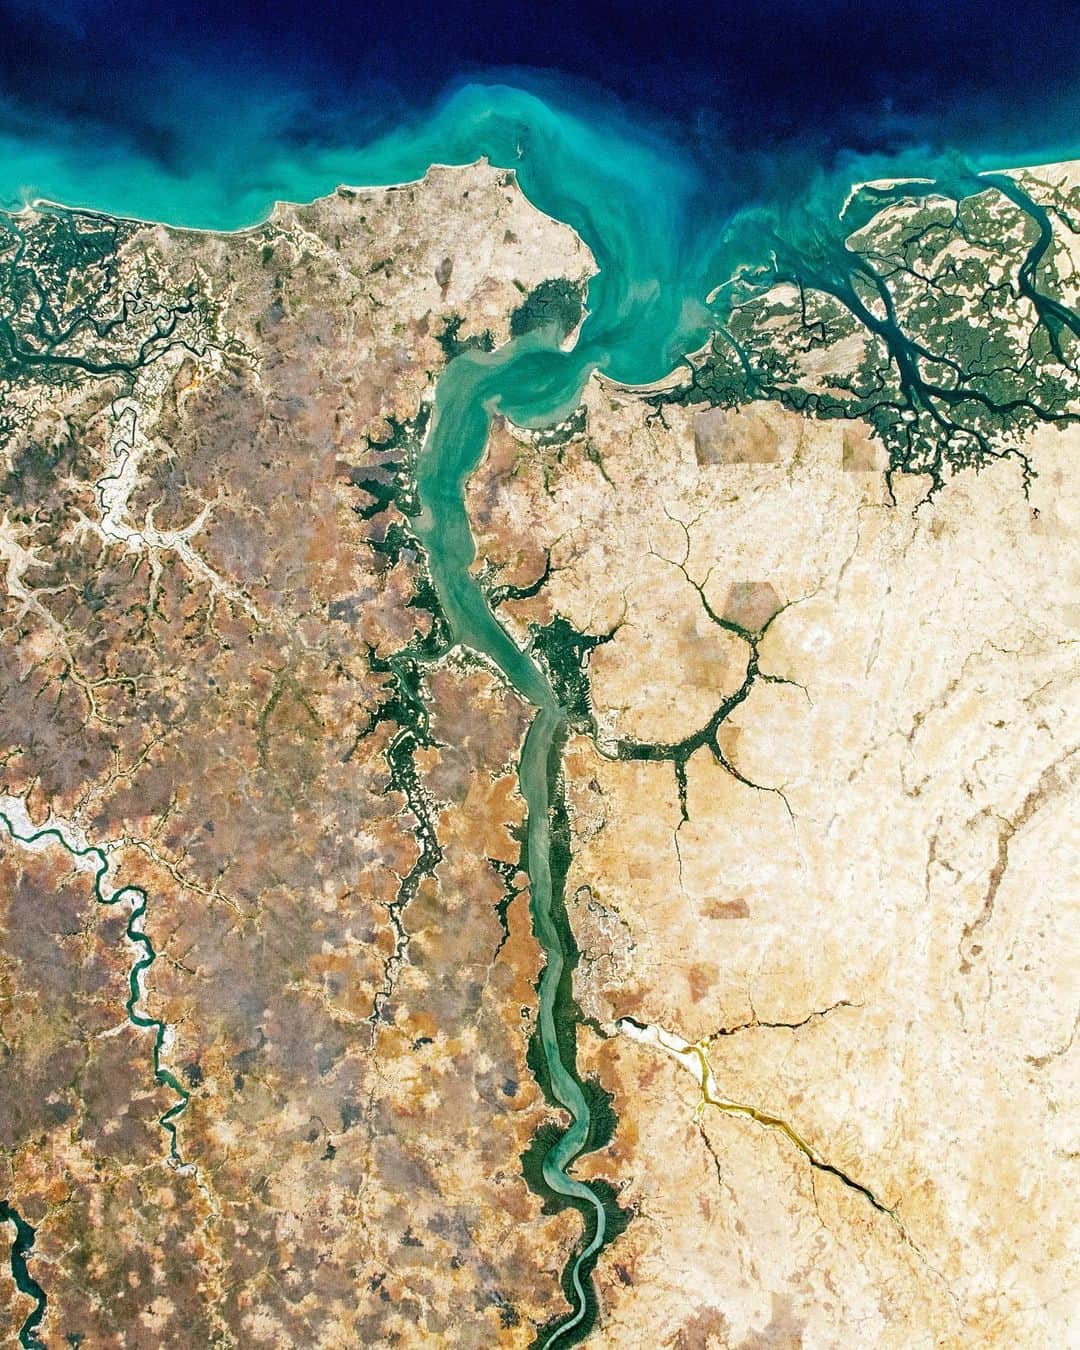 Daily Overviewのインスタグラム：「The Gambia is the smallest country in mainland Africa, following the path of its namesake river roughly 200 miles (320 km) inland from the Atlantic Ocean. Apart from its western coast, the nation is bordered on all sides by Senegal and is just 4,127 square miles (10,689 square km) in area — about one-third the size of Belgium. Some 2 million people live in The Gambia, many residing on the coast and in the capital city of Banjul. — Created by @overview Source imagery: @nasaearth」